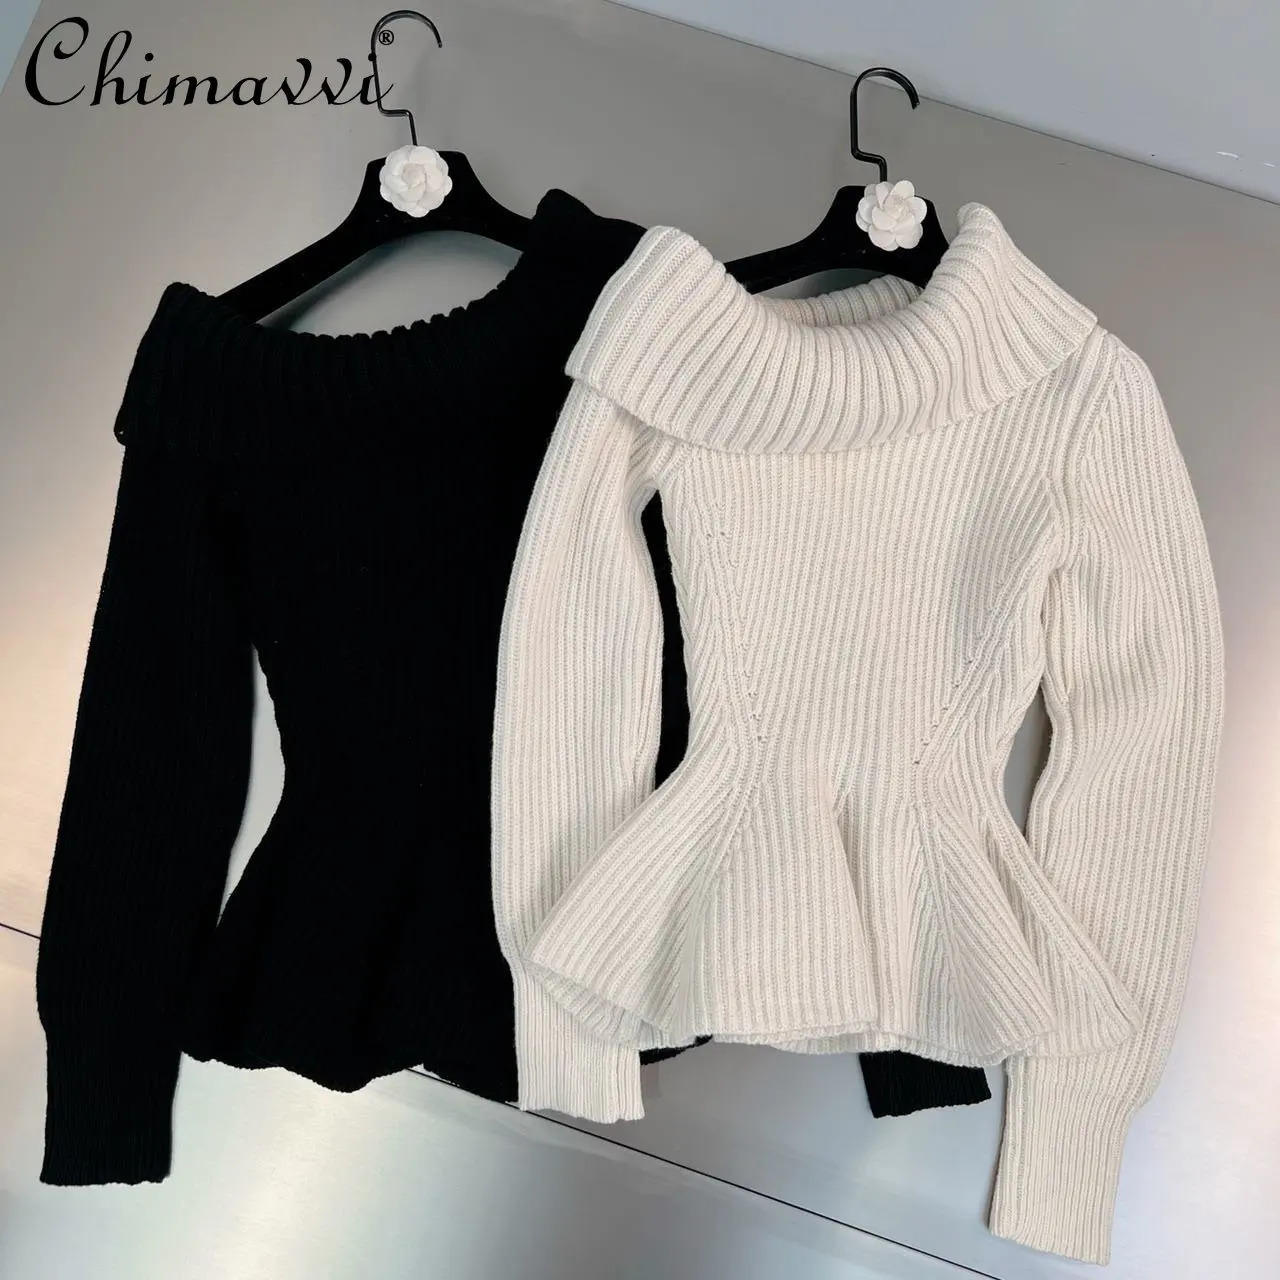 New Autumn Fashion Elegant Waist Trimming Ruffles Knitted Top Women's European Simple Classic Style Solid Long Sleeve Sweater